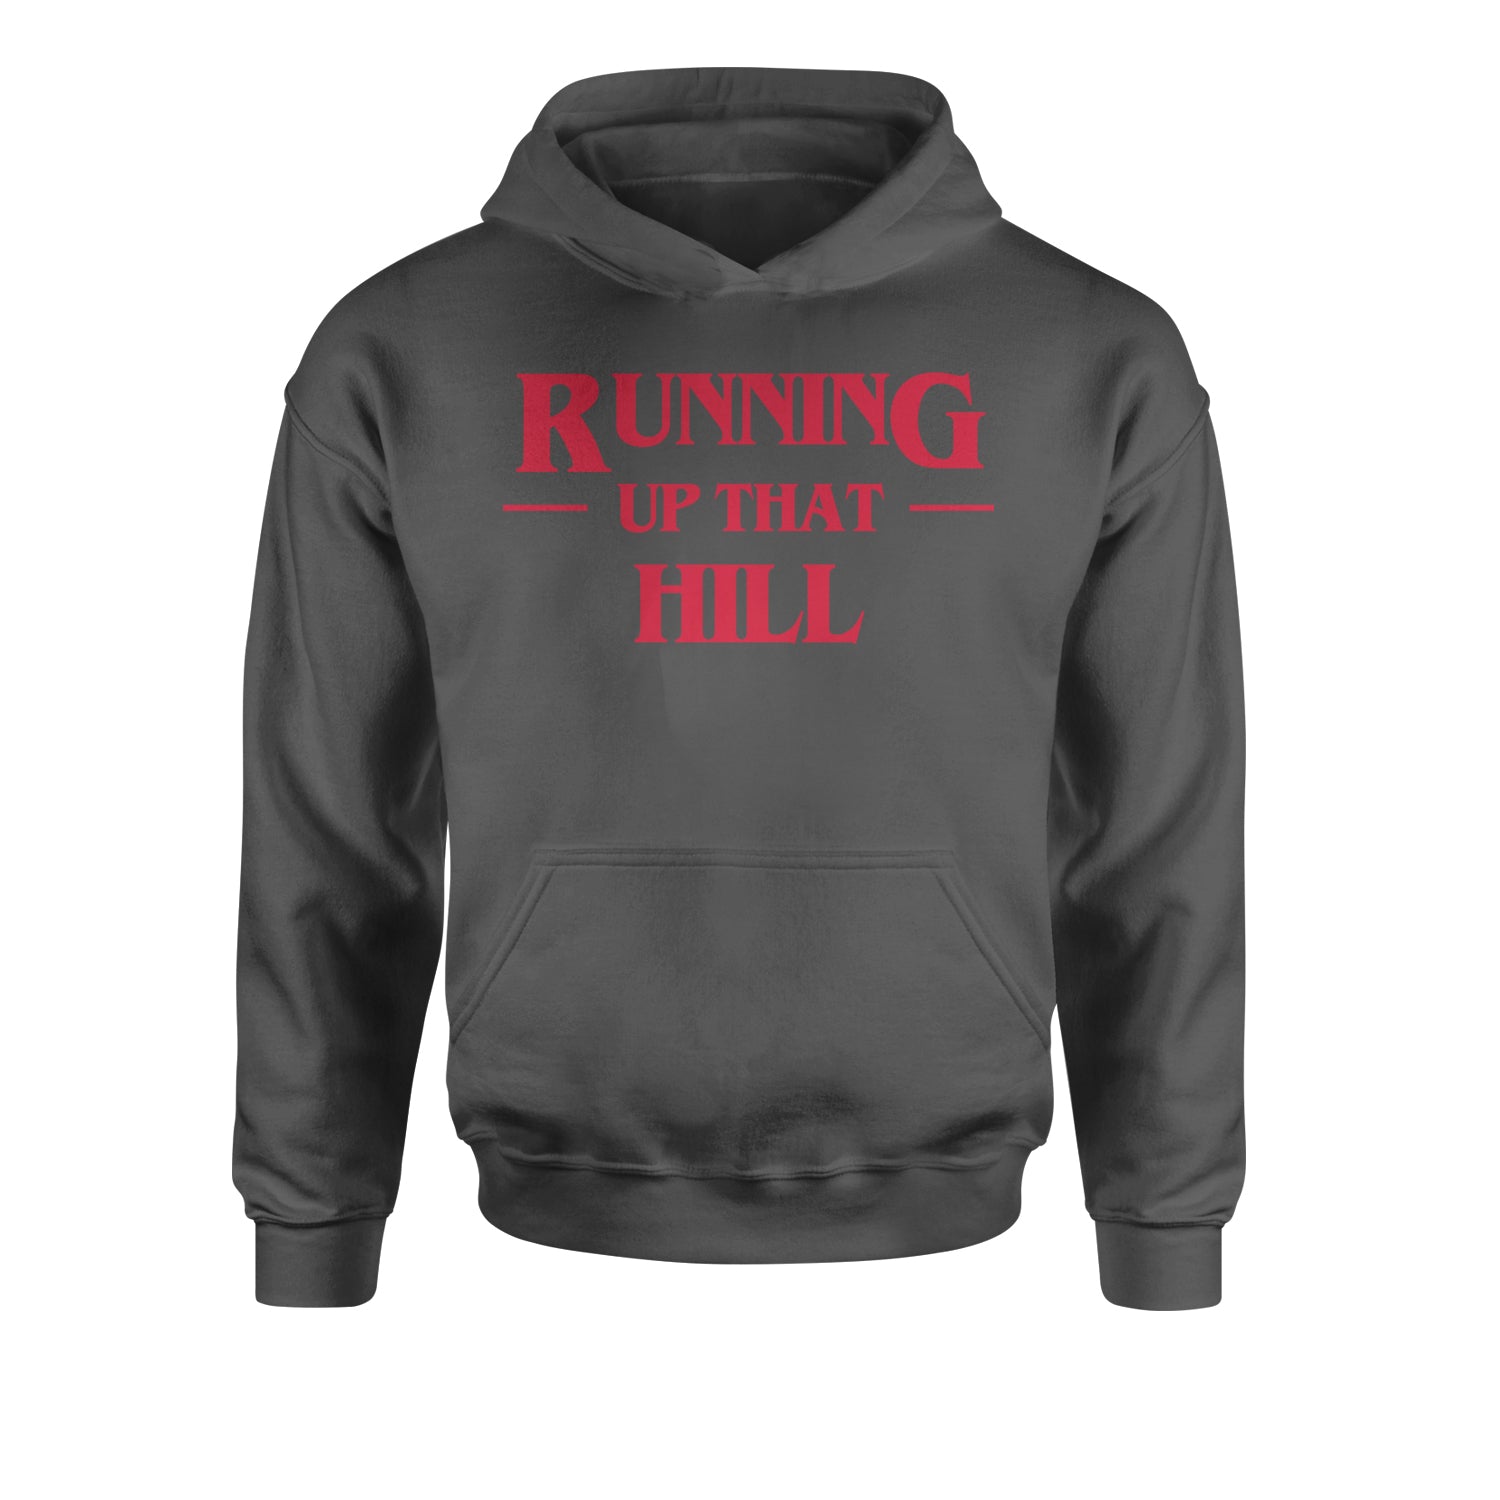 Running Up That Hill Youth-Sized Hoodie 4, don’t, eleven, four, friends, lie, season by Expression Tees